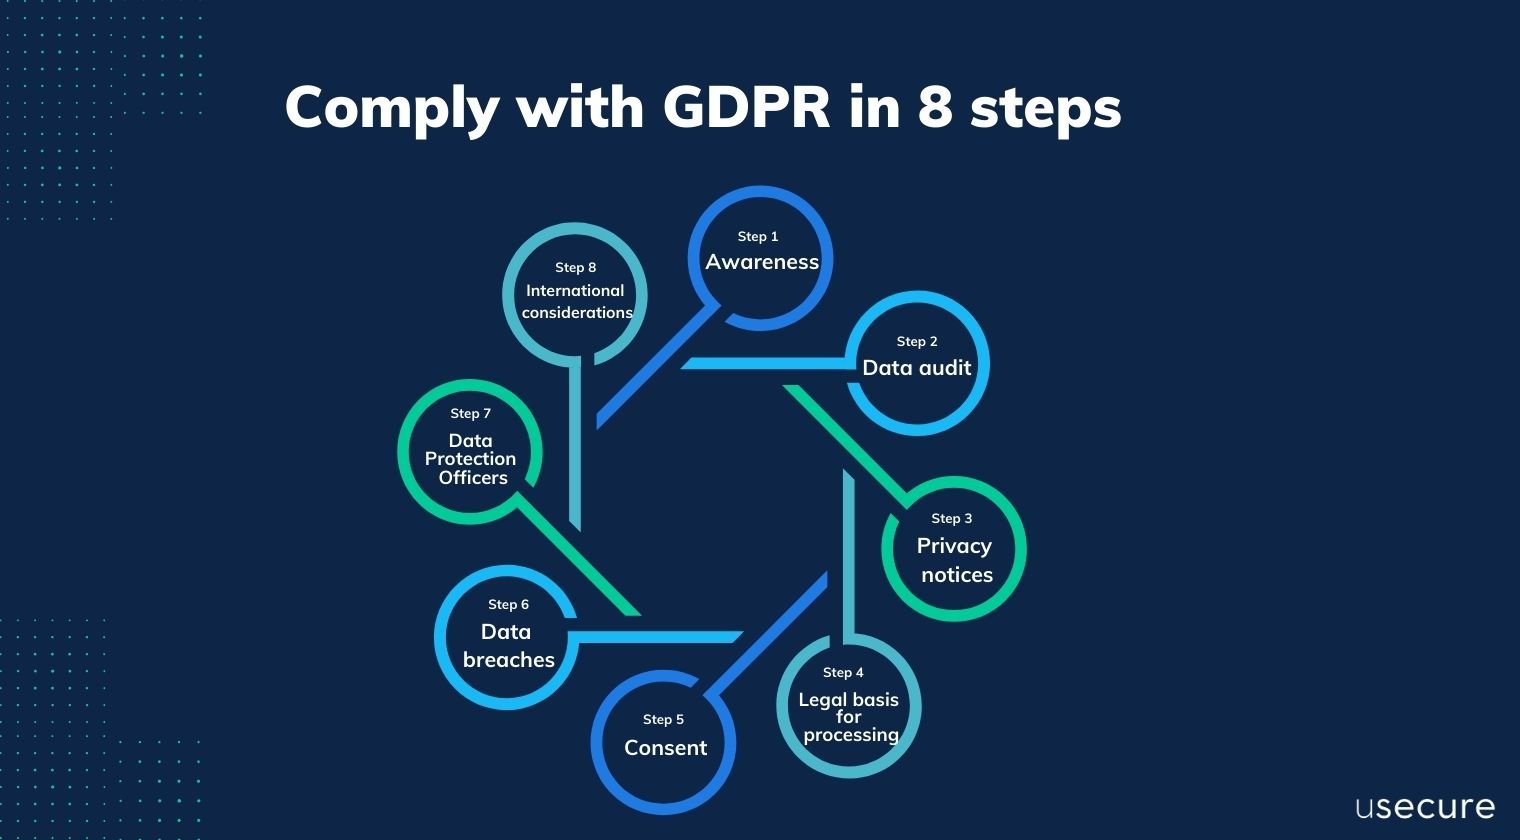 Comply with GDPR in 8 steps